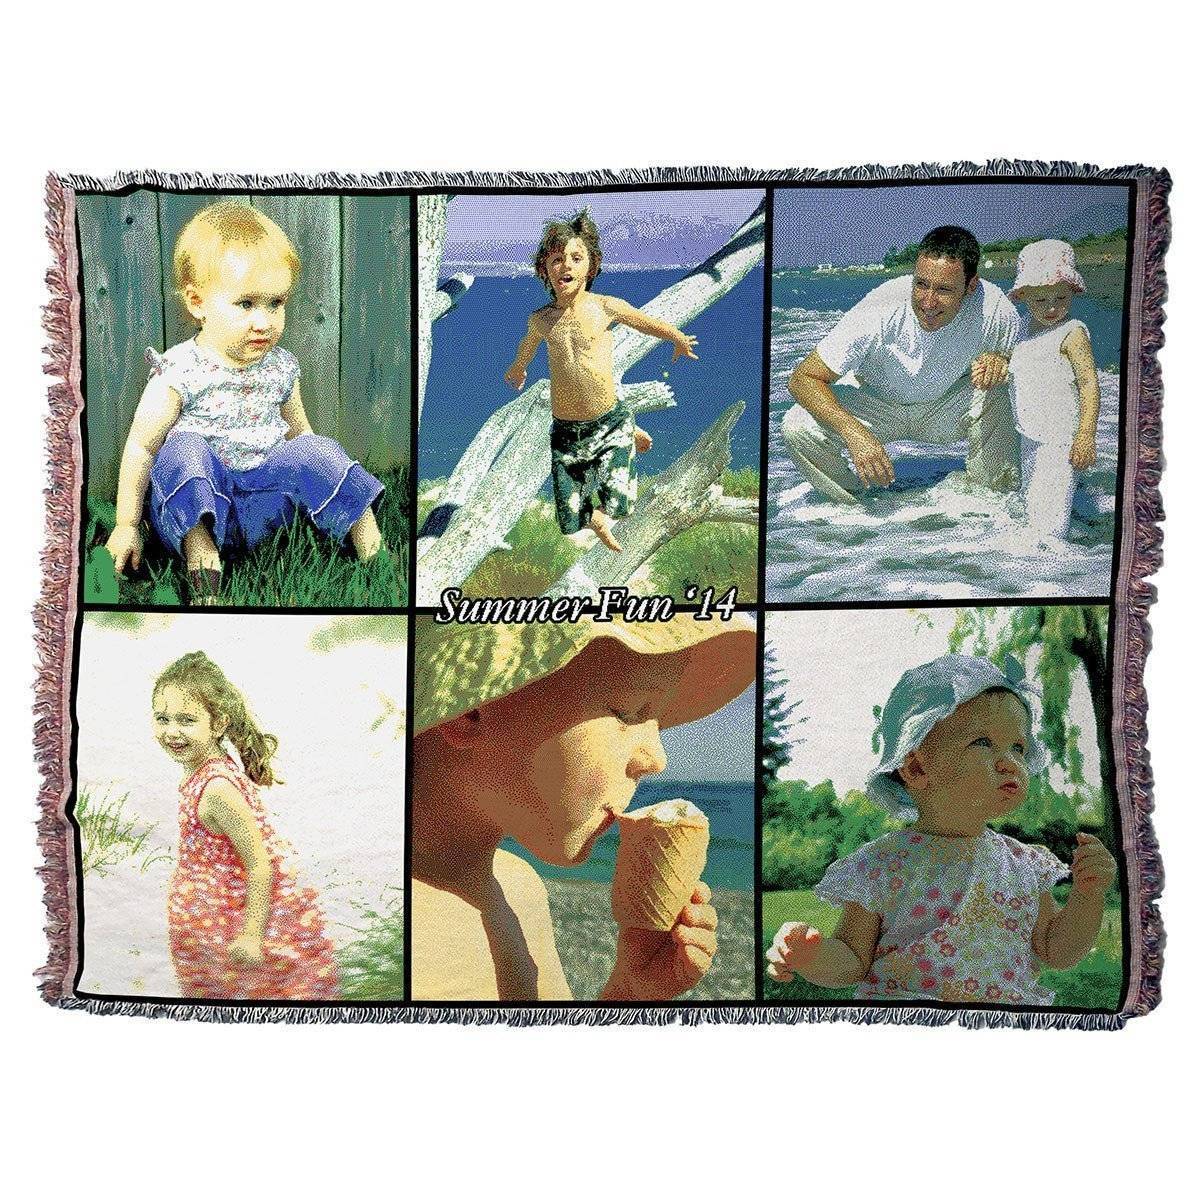 Jacquard Woven Full Service Collage Blanket - 60" x 80" (Large)